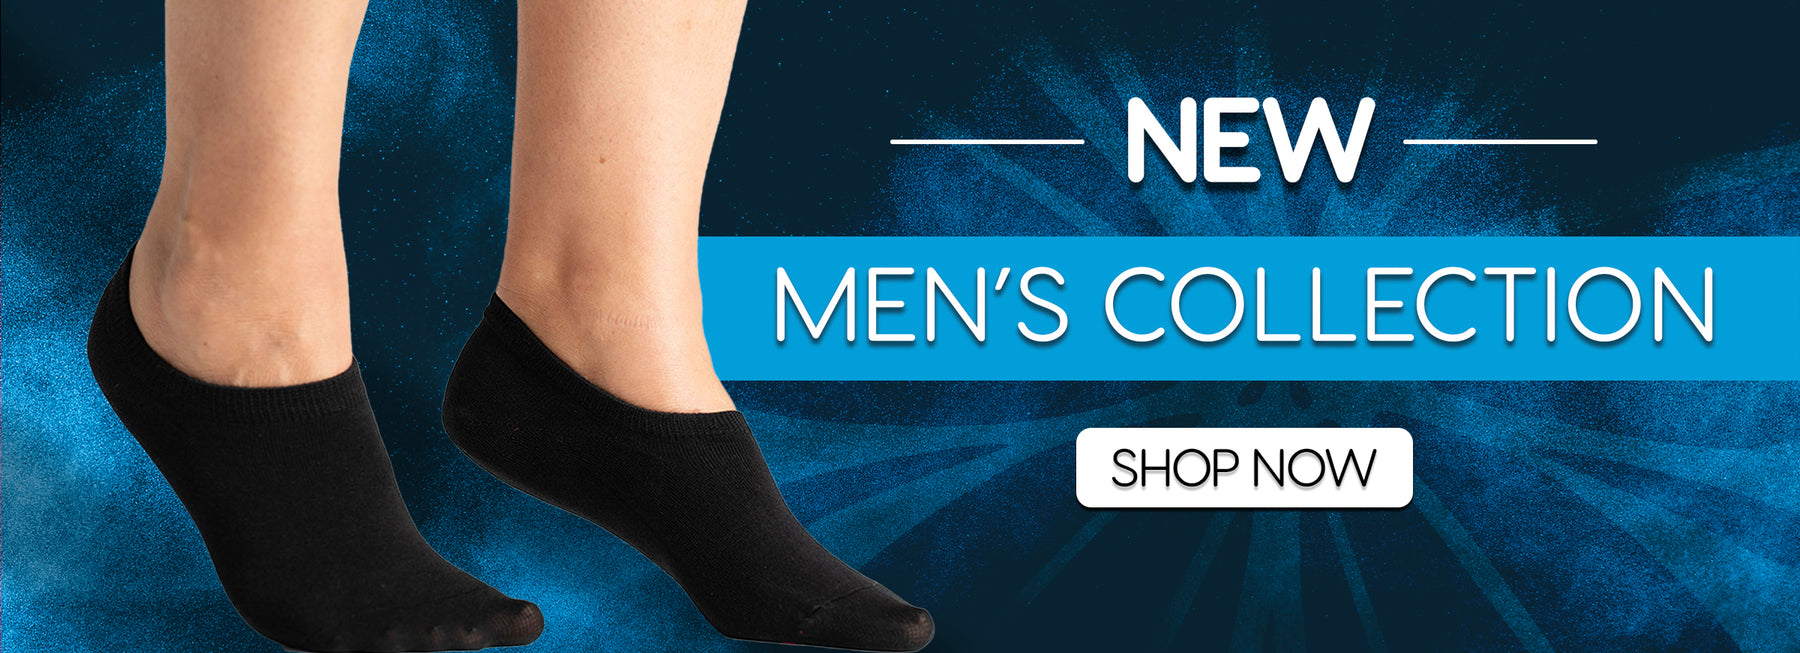 On The Go! Hosiery - The Best Hosiery You Will Ever Put On!